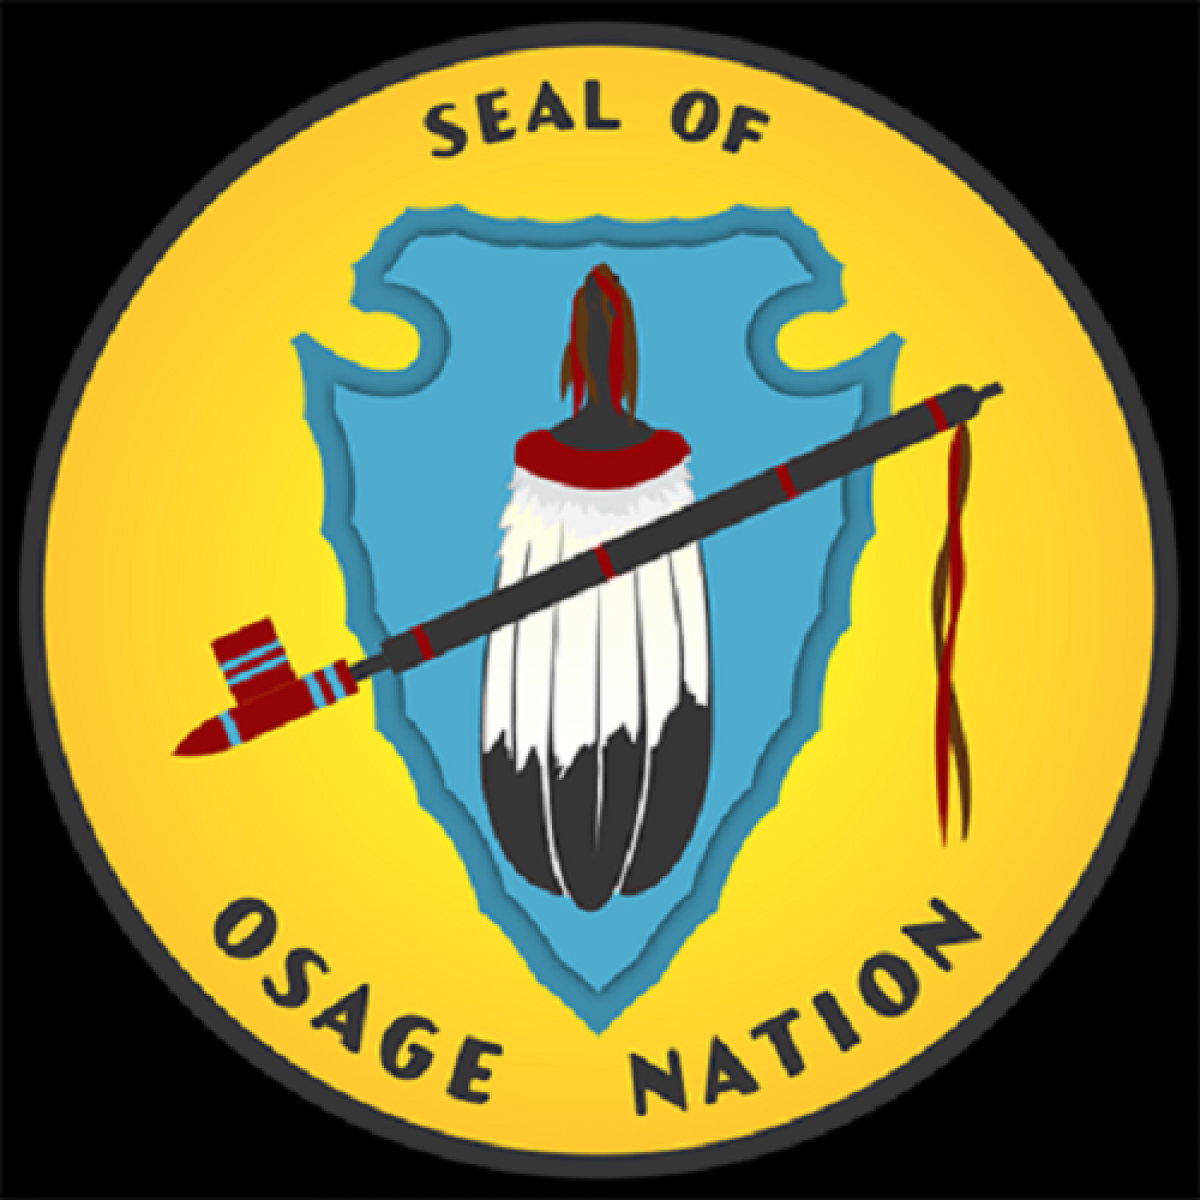 OK, Grove, Headstone Symbols and Meanings, Osage Nation